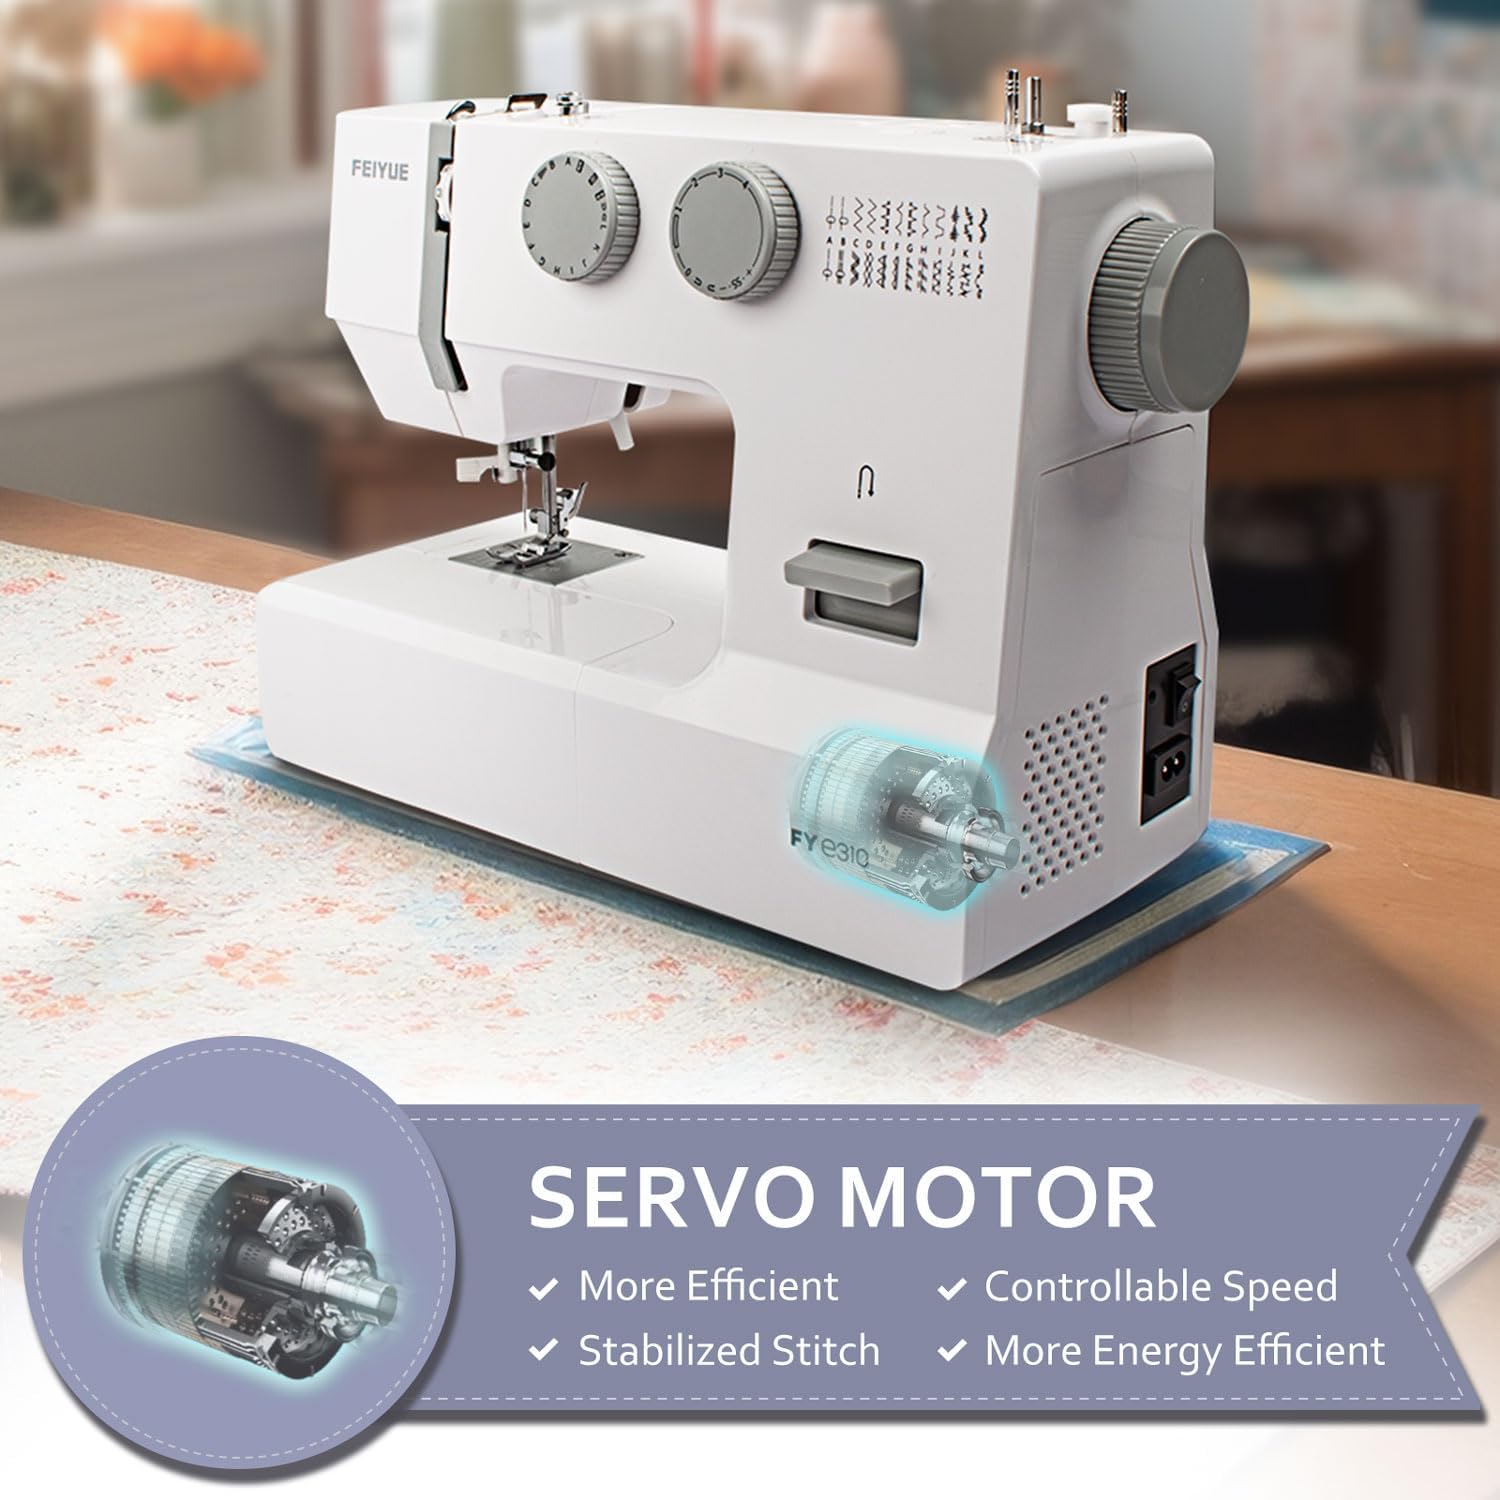 FEIYUE FYe310, Sewing Machine with Accessory Kit, 105 Stitch Applications,  100W Servo Motor, Heavy Duty Interior Metal Frame, Dual LED Lights, Easy to  Use (White)